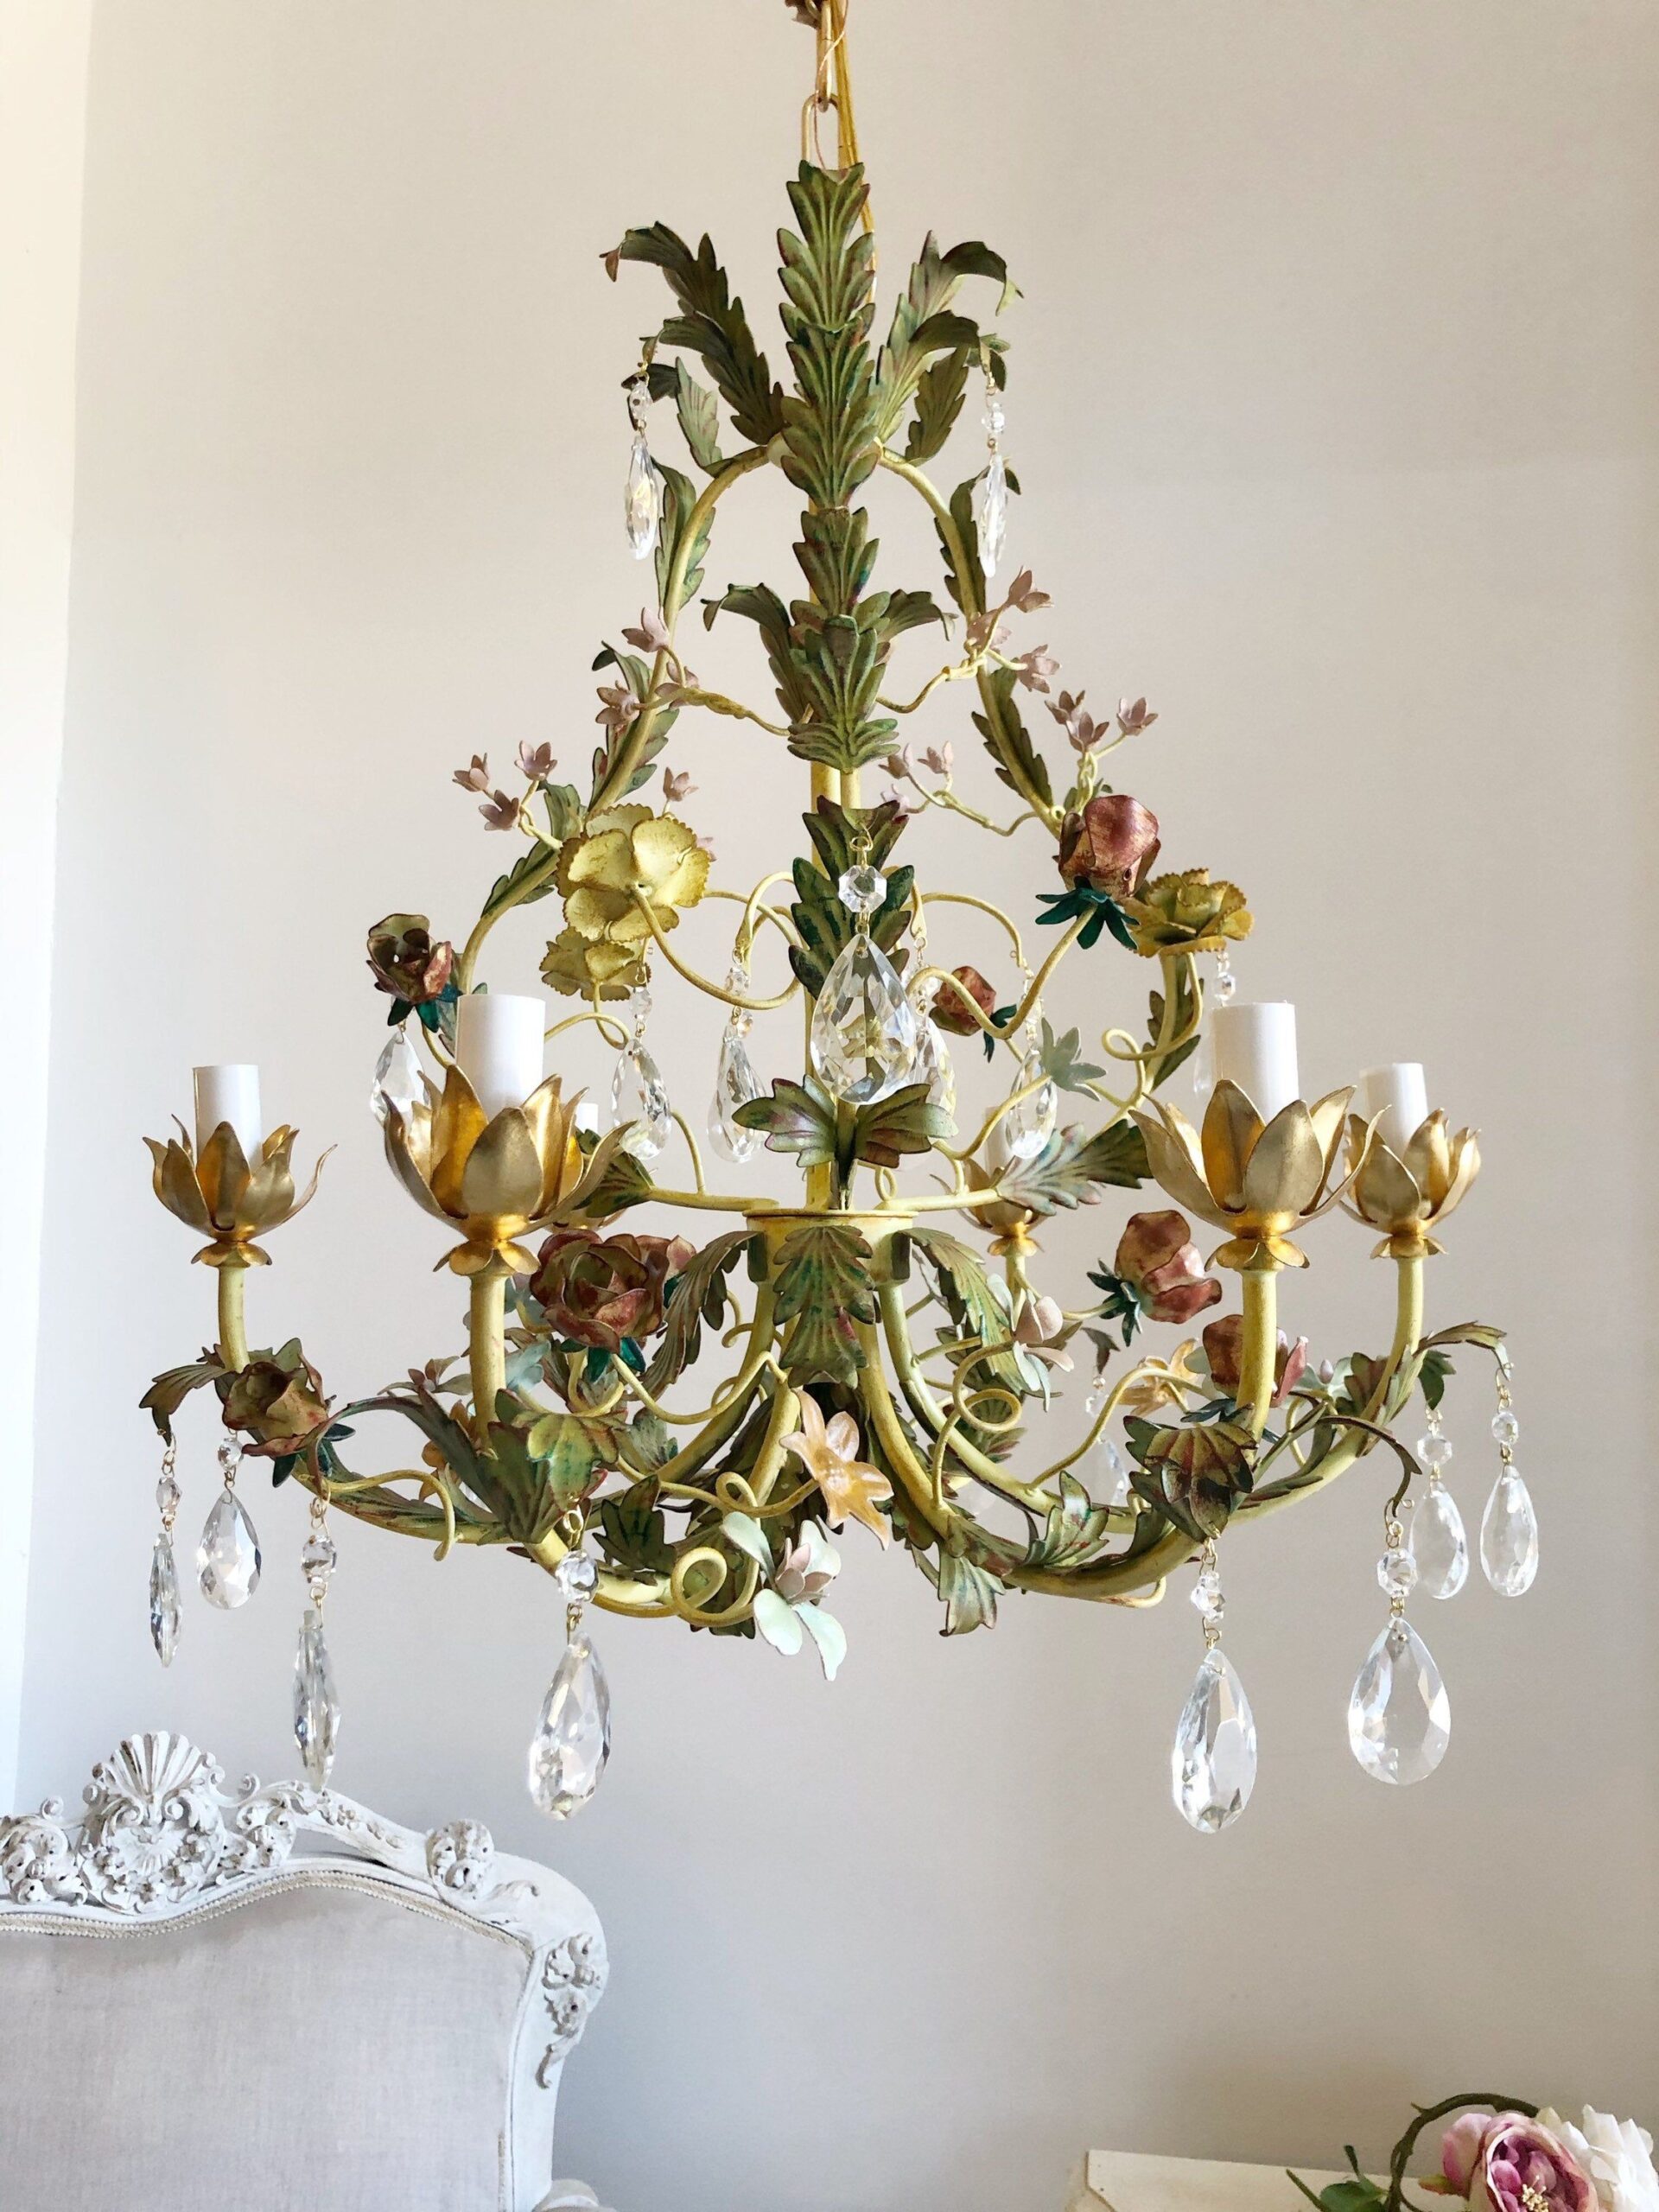 Italian Chandeliers Decor : Elegant Italian Chandeliers Decor for Your Home Without Breaking the Bank